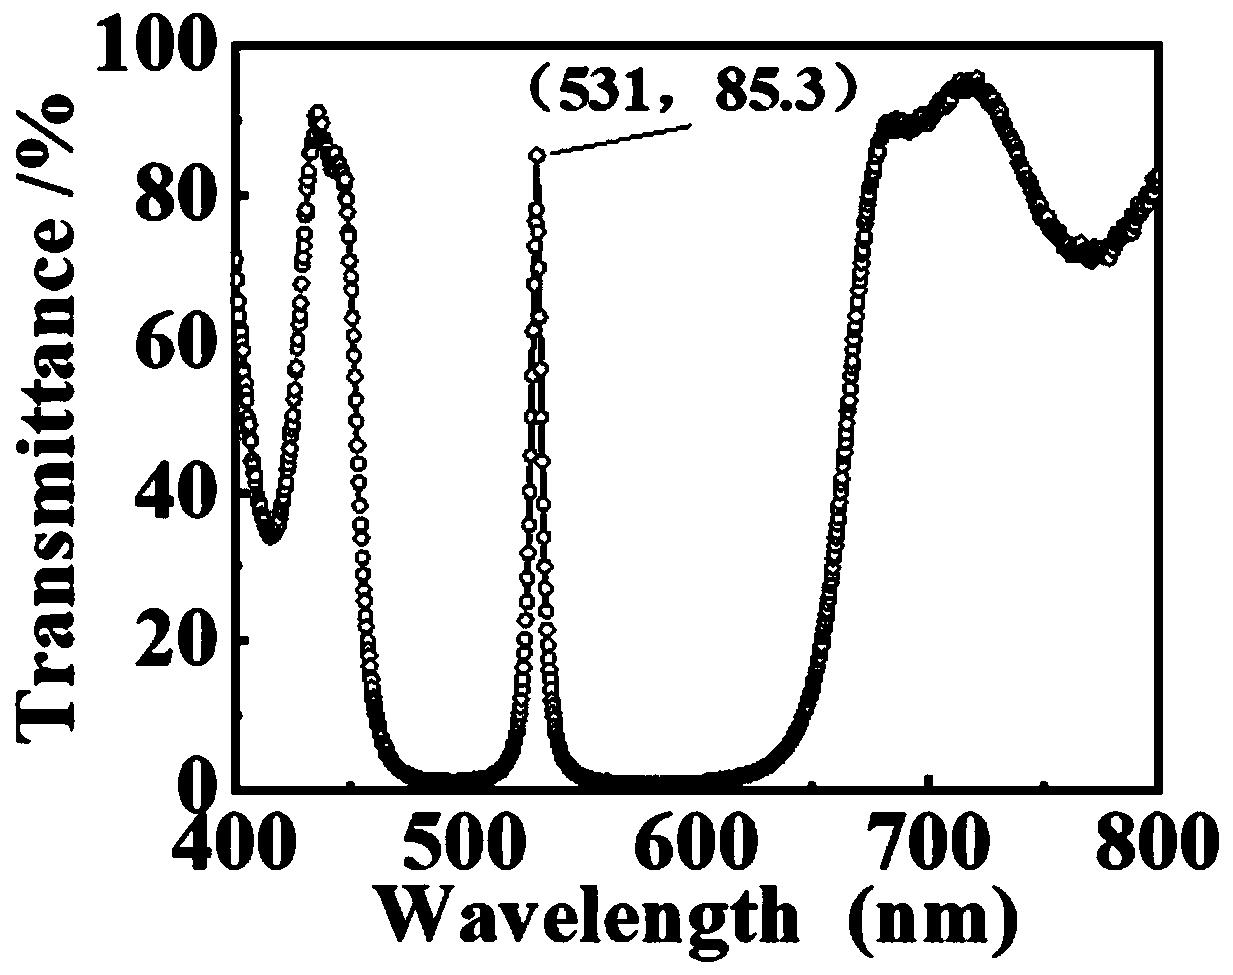 Graphene photoelectric detector with band-pass filtering from visible light to near-infrared light